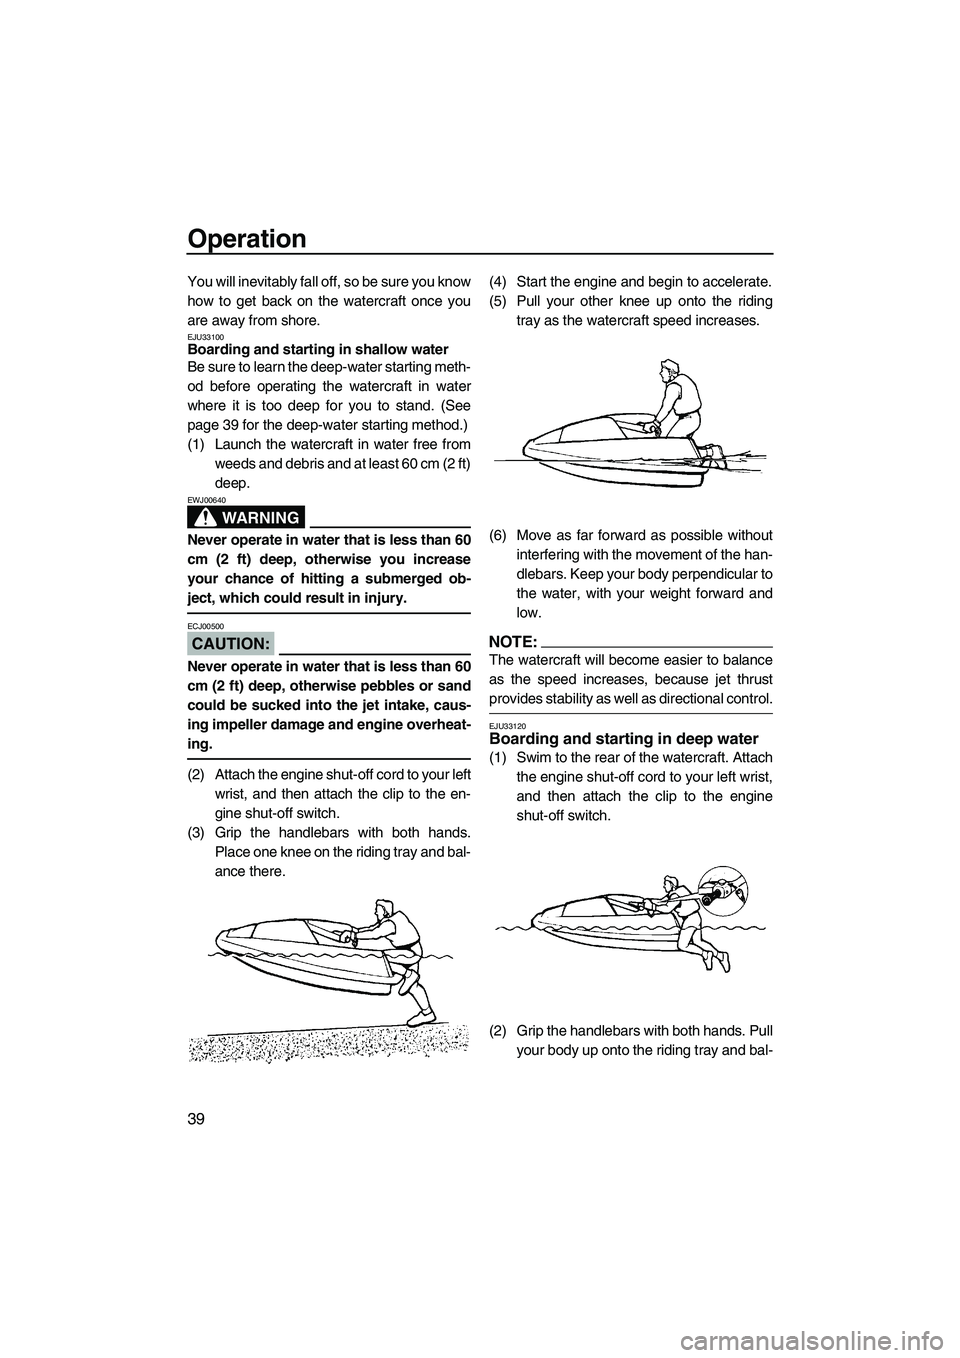 YAMAHA SUPERJET 2007 Service Manual Operation
39
You will inevitably fall off, so be sure you know
how to get back on the watercraft once you
are away from shore.
EJU33100Boarding and starting in shallow water 
Be sure to learn the deep